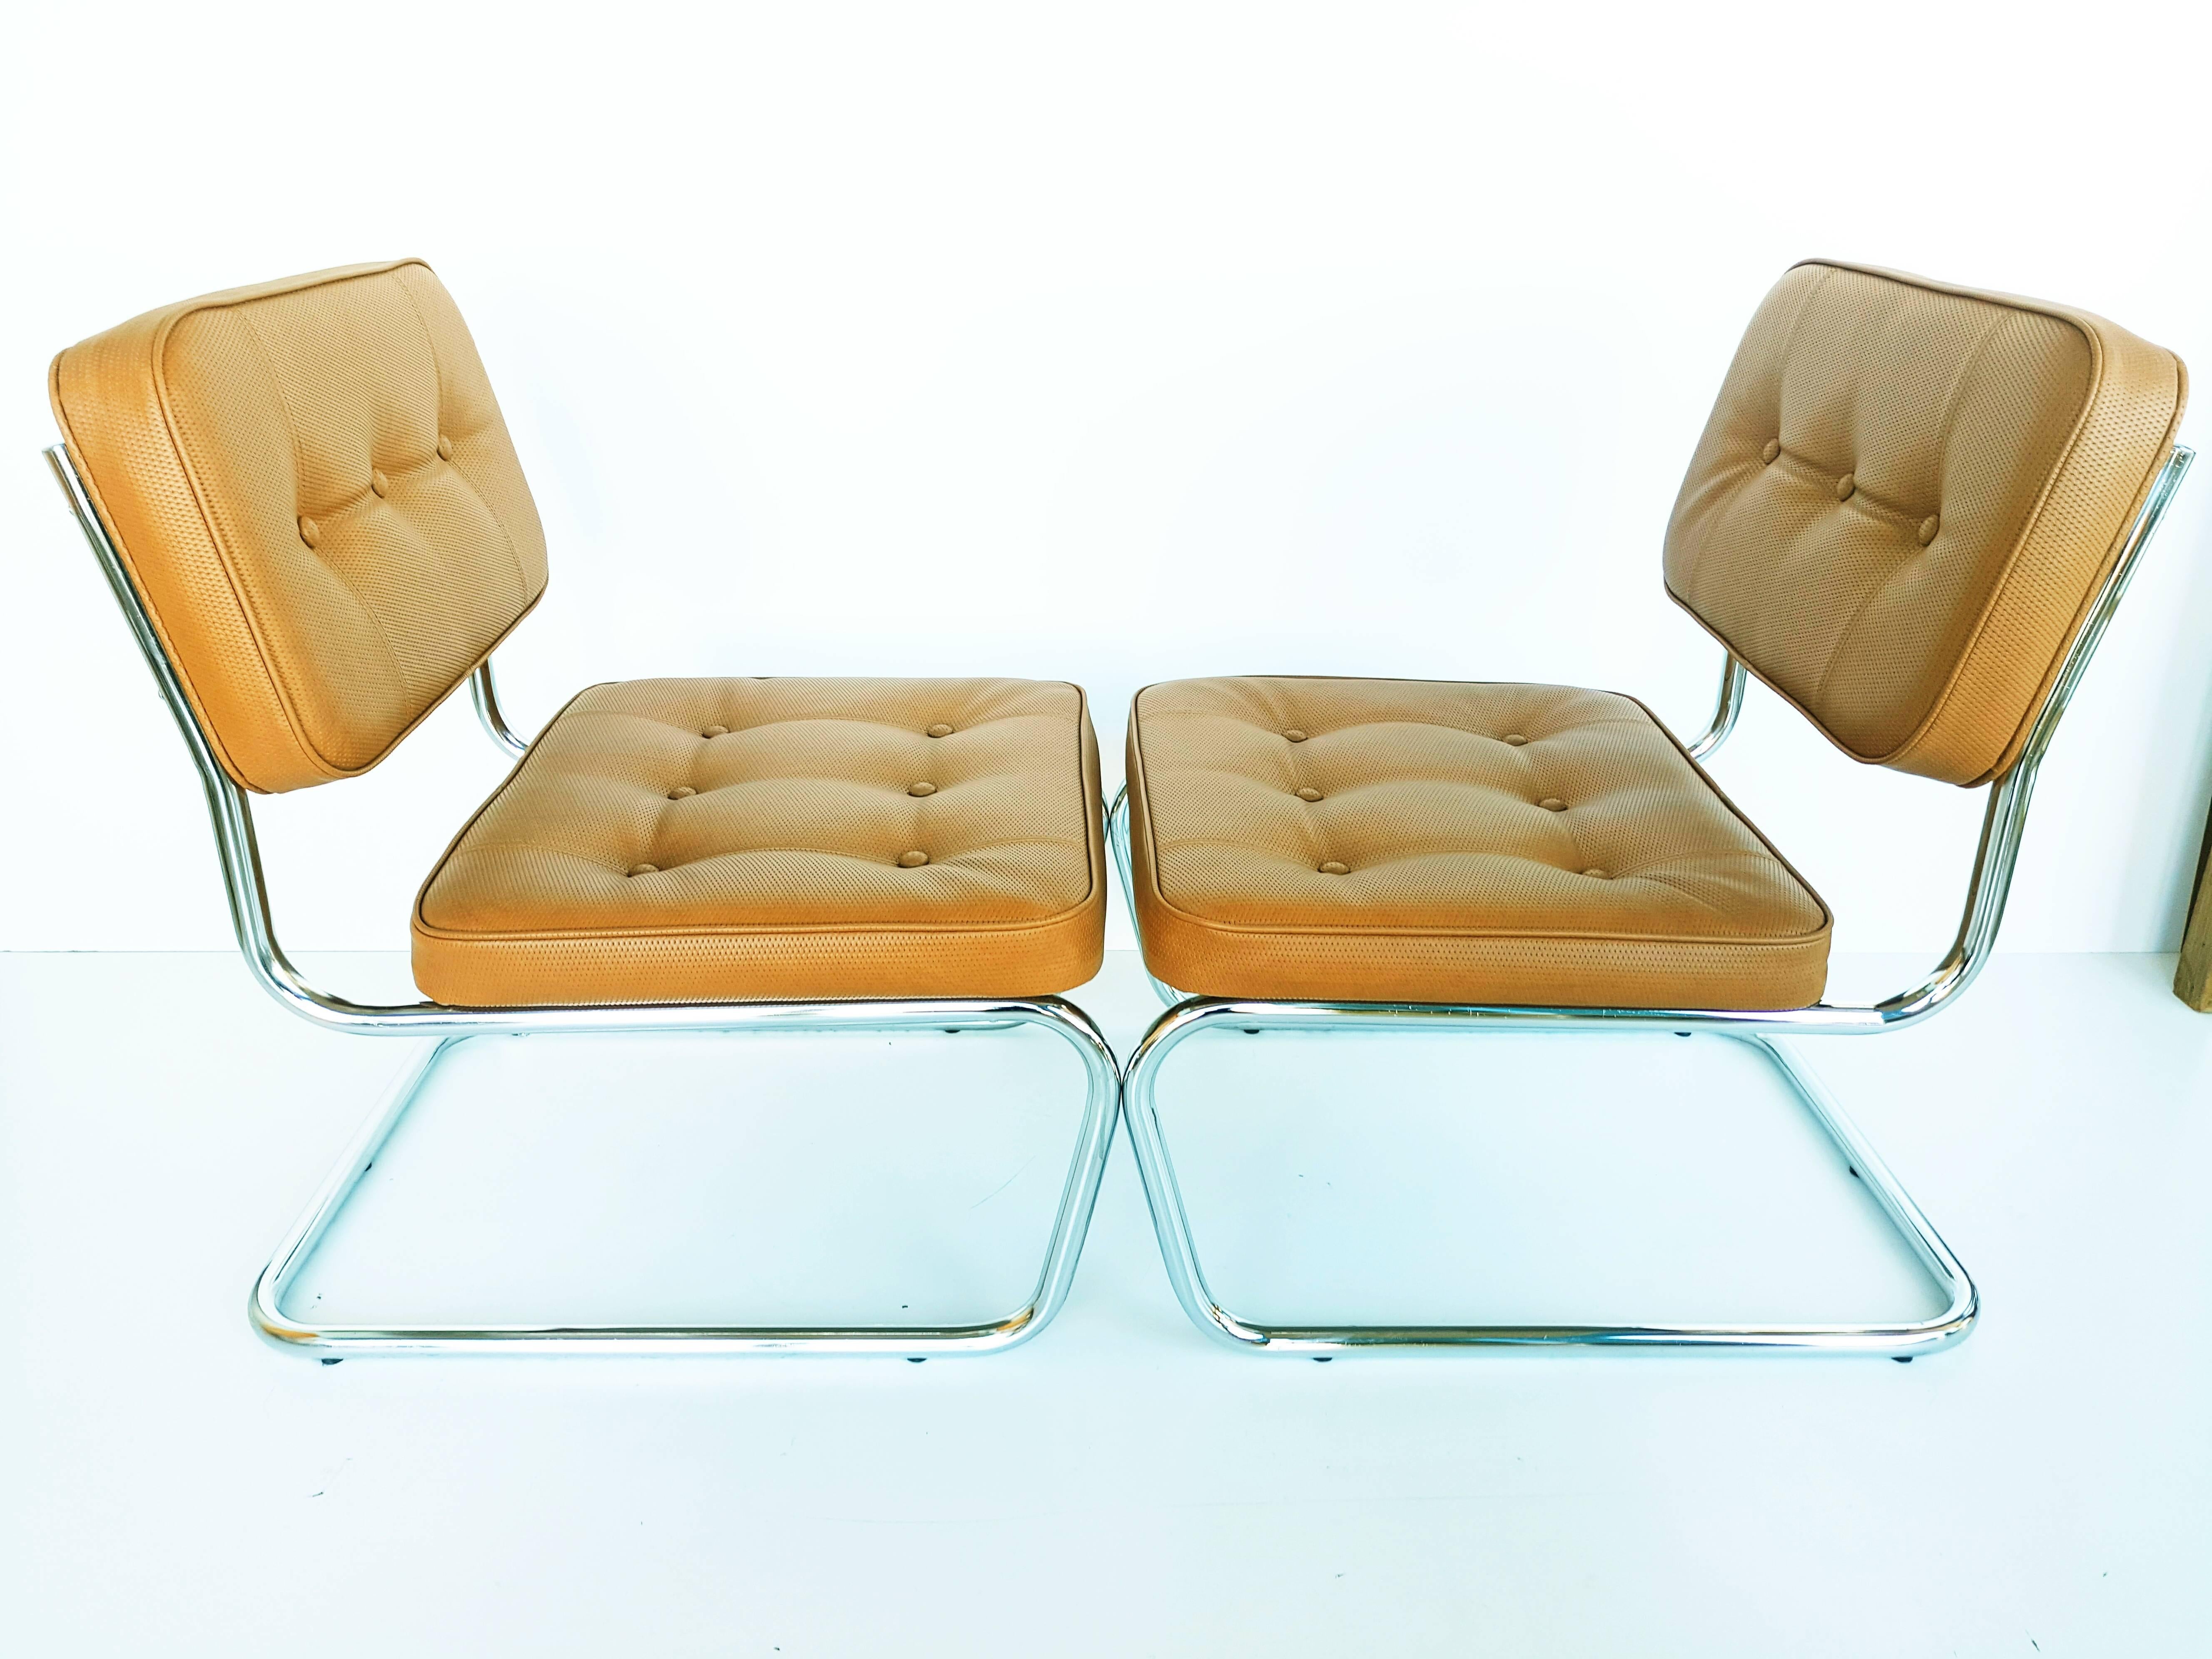 20th Century Pair of Tan Mb-Tex Lounge Chairs, circa 1970 For Sale